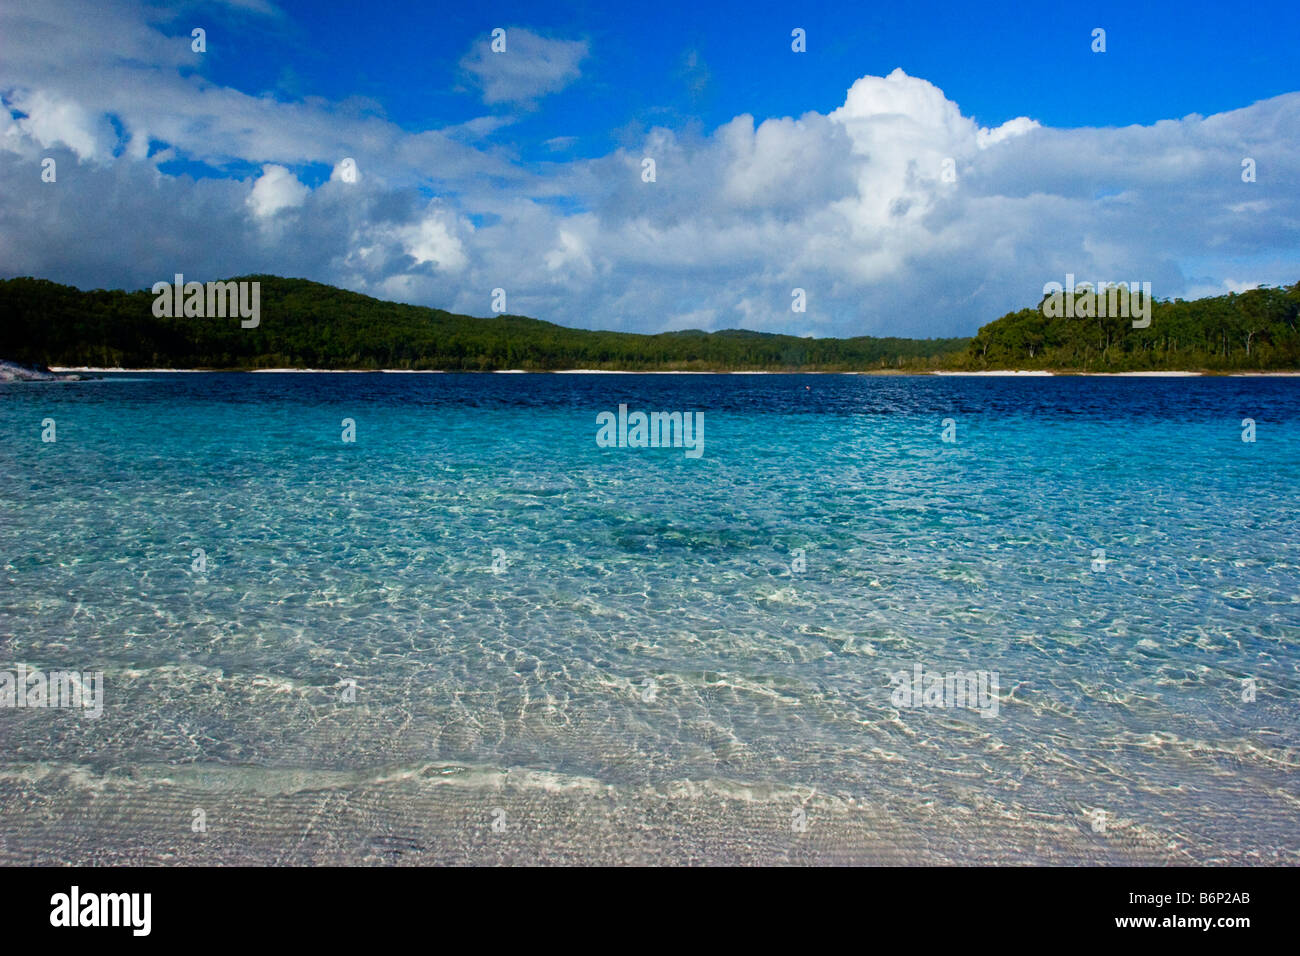 Image looking out across the beautiful white sands and blue waters of Lake McKenzie Fraser Island Australia Stock Photo